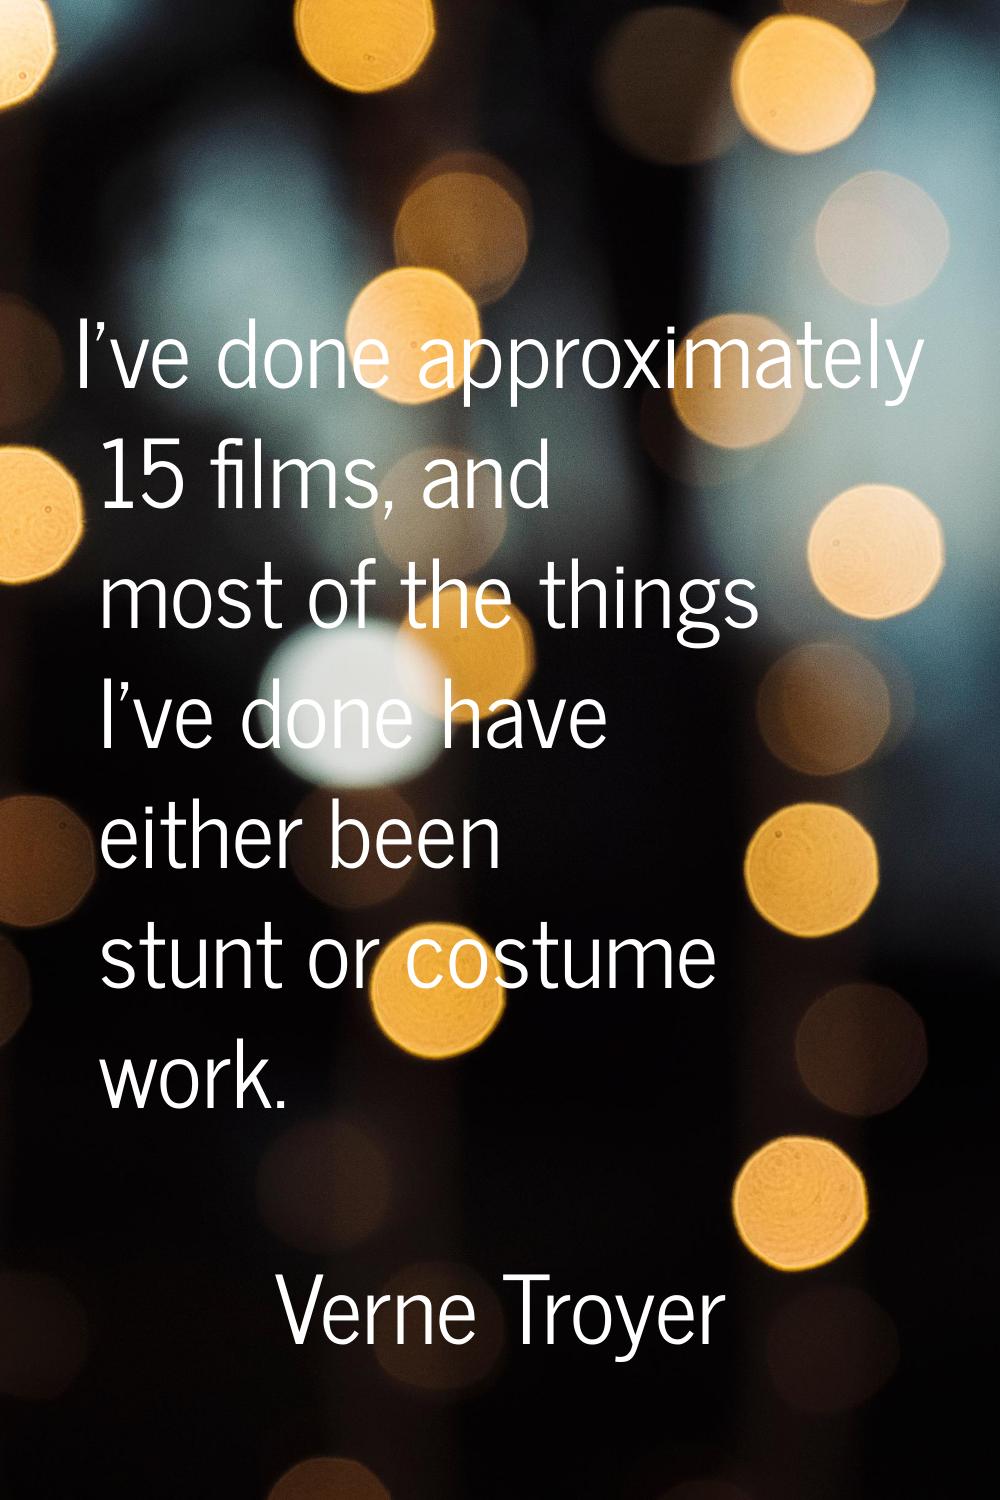 I've done approximately 15 films, and most of the things I've done have either been stunt or costum